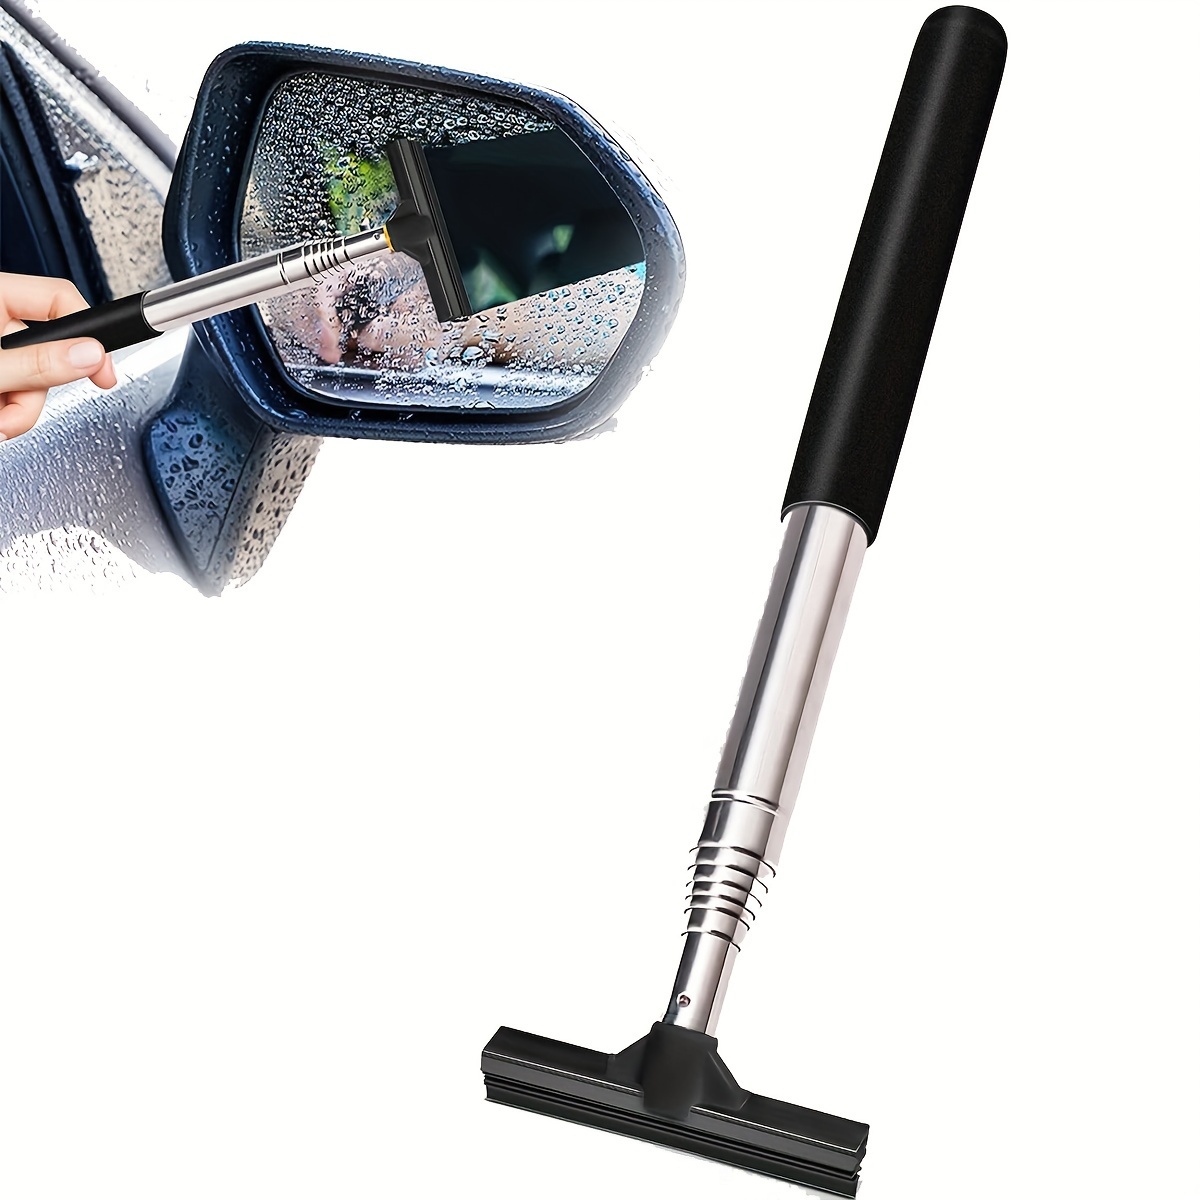 Windshield Squeegee for Car Windows Rearview Mirror Wiper